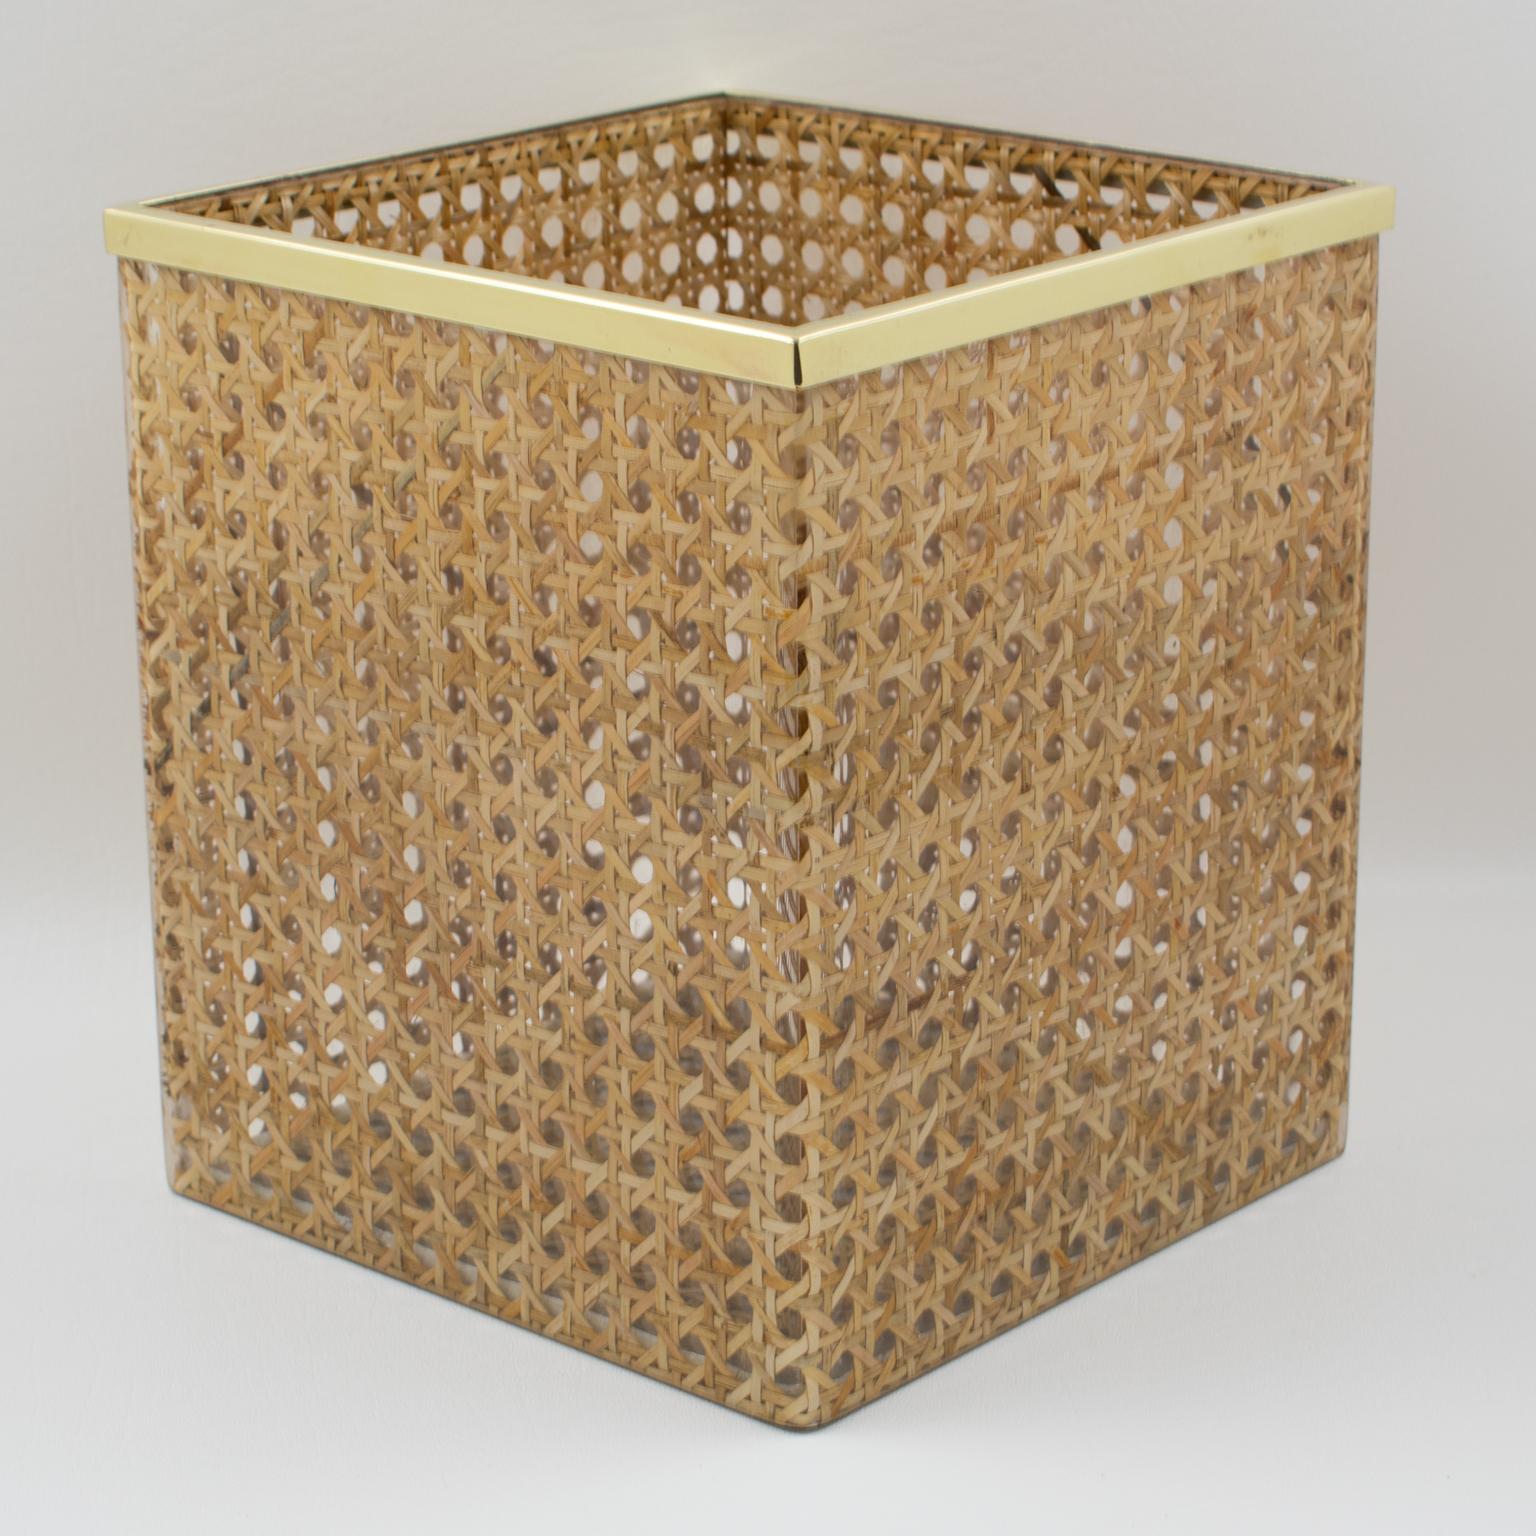 Lovely waste basket designed for Christian Dior Home Collection in 1970s. Geometric shape with brass gallery and real rattan canework embedded in the crystal clear Lucite. Great desk or home accessory for any modern interior.
Measurements: 7.69 in.